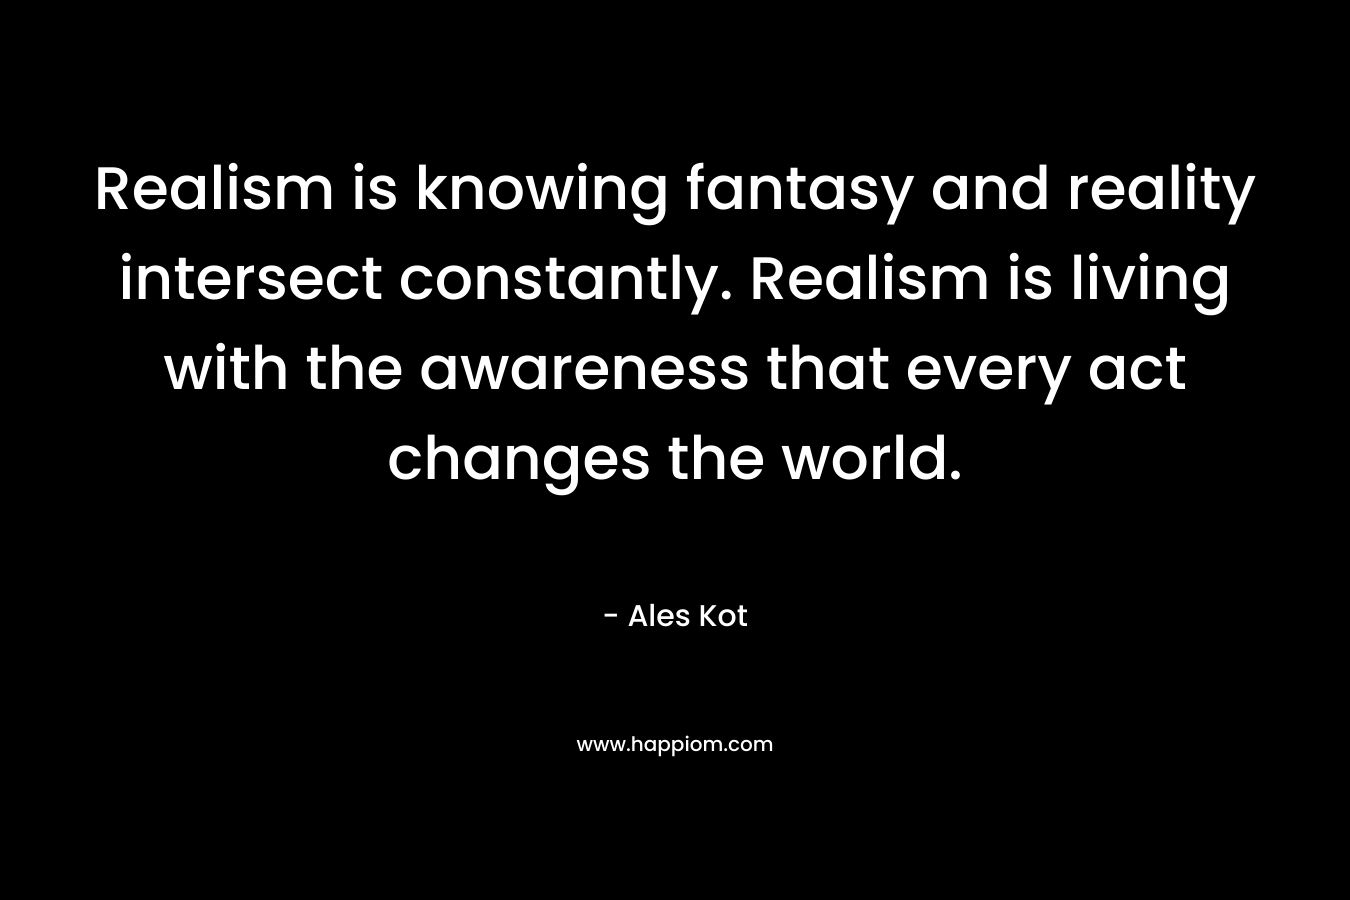 Realism is knowing fantasy and reality intersect constantly. Realism is living with the awareness that every act changes the world.